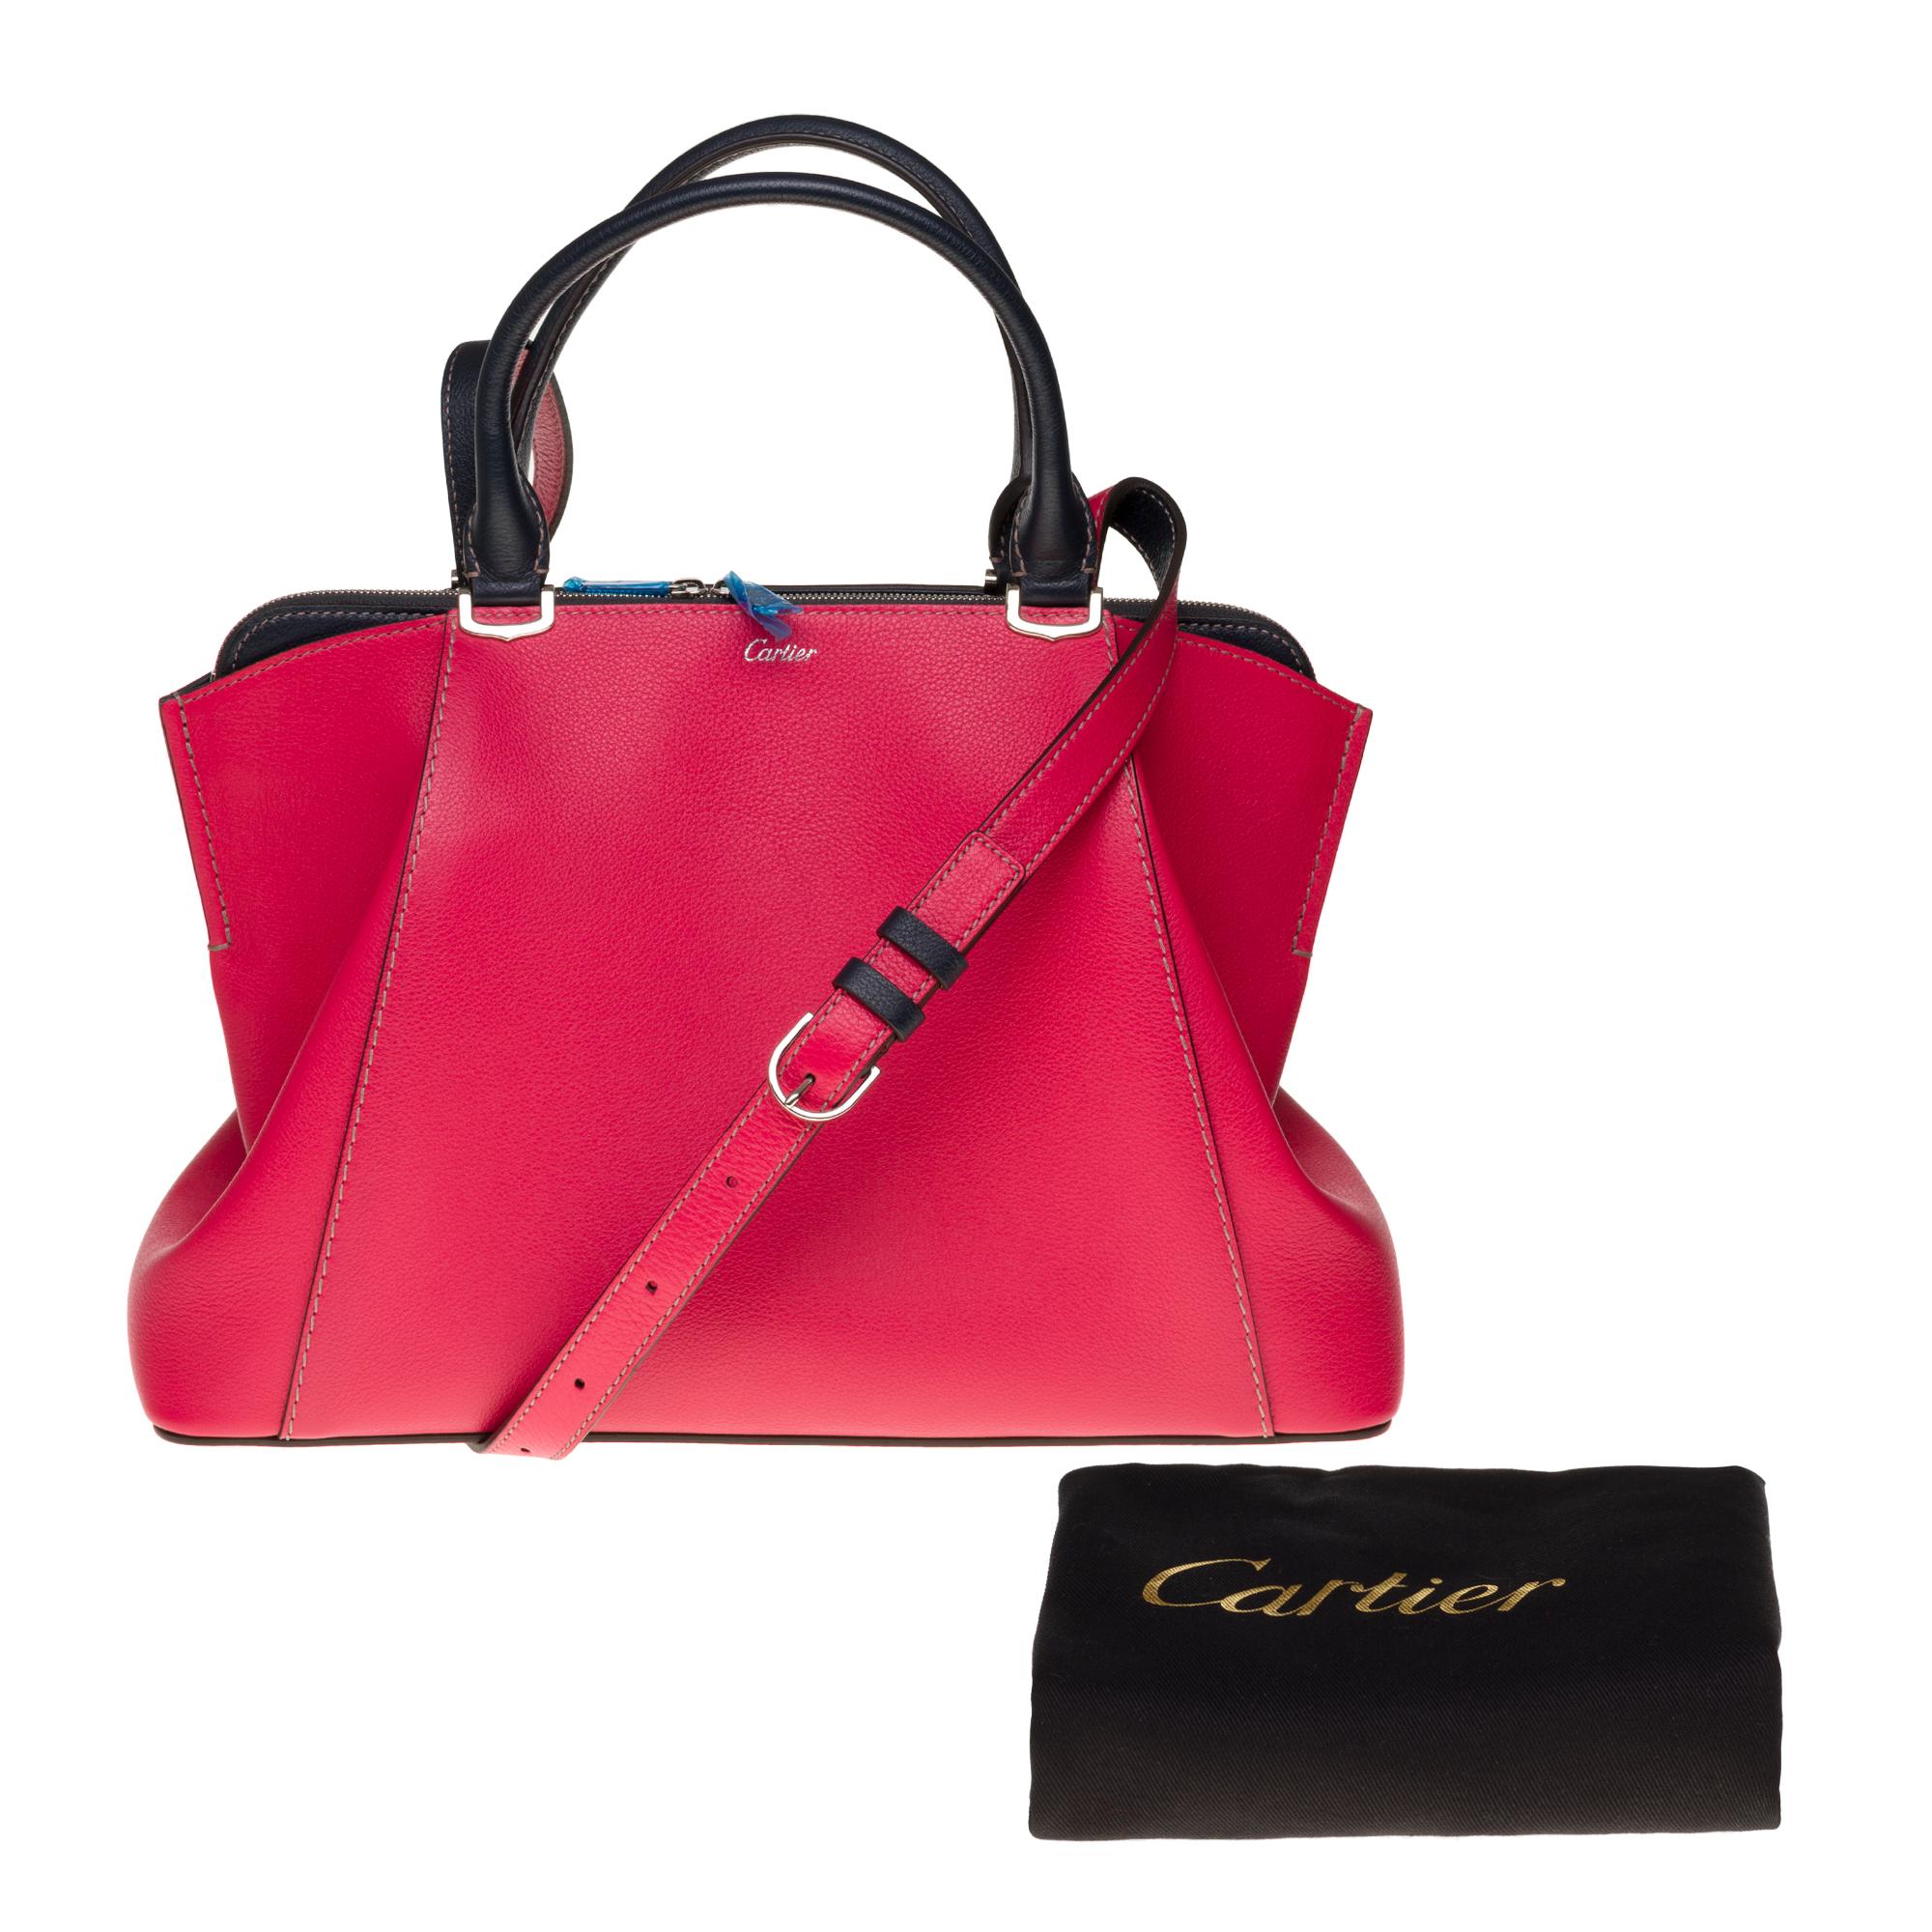 Brand New C de Cartier handbag with strap in red and black leather with SHW 3